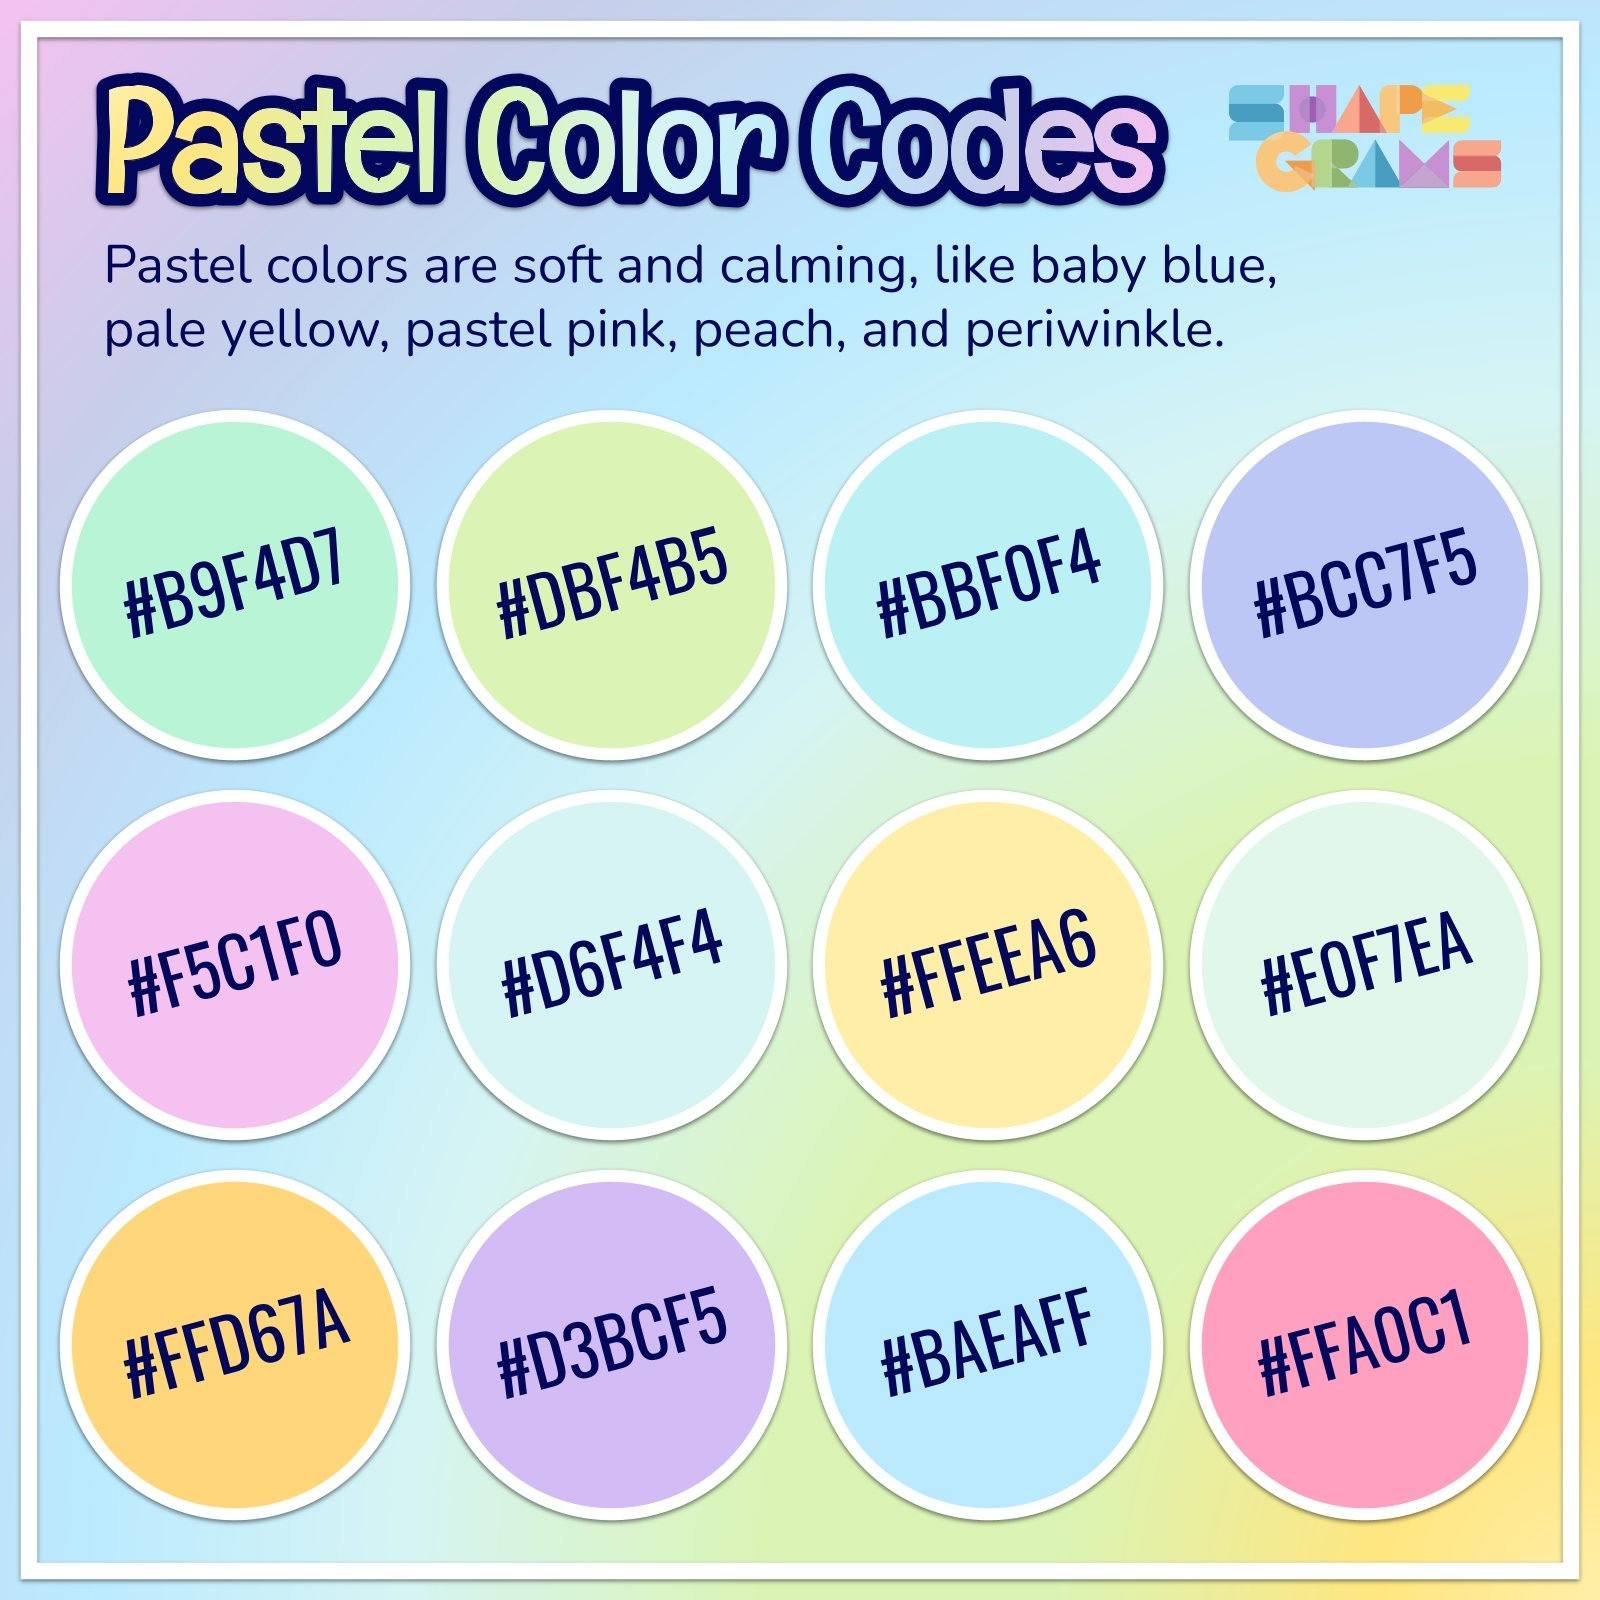 Pastel colors are soft and calming, like baby blue, pale yellow, pastel pink, peach, and periwinkle.

Pastels are often associated with spring. Perhaps because spring brings us flowers and ice cream?

#Shapegrams #Arted #Teaching #ArtTeacher #EdTech